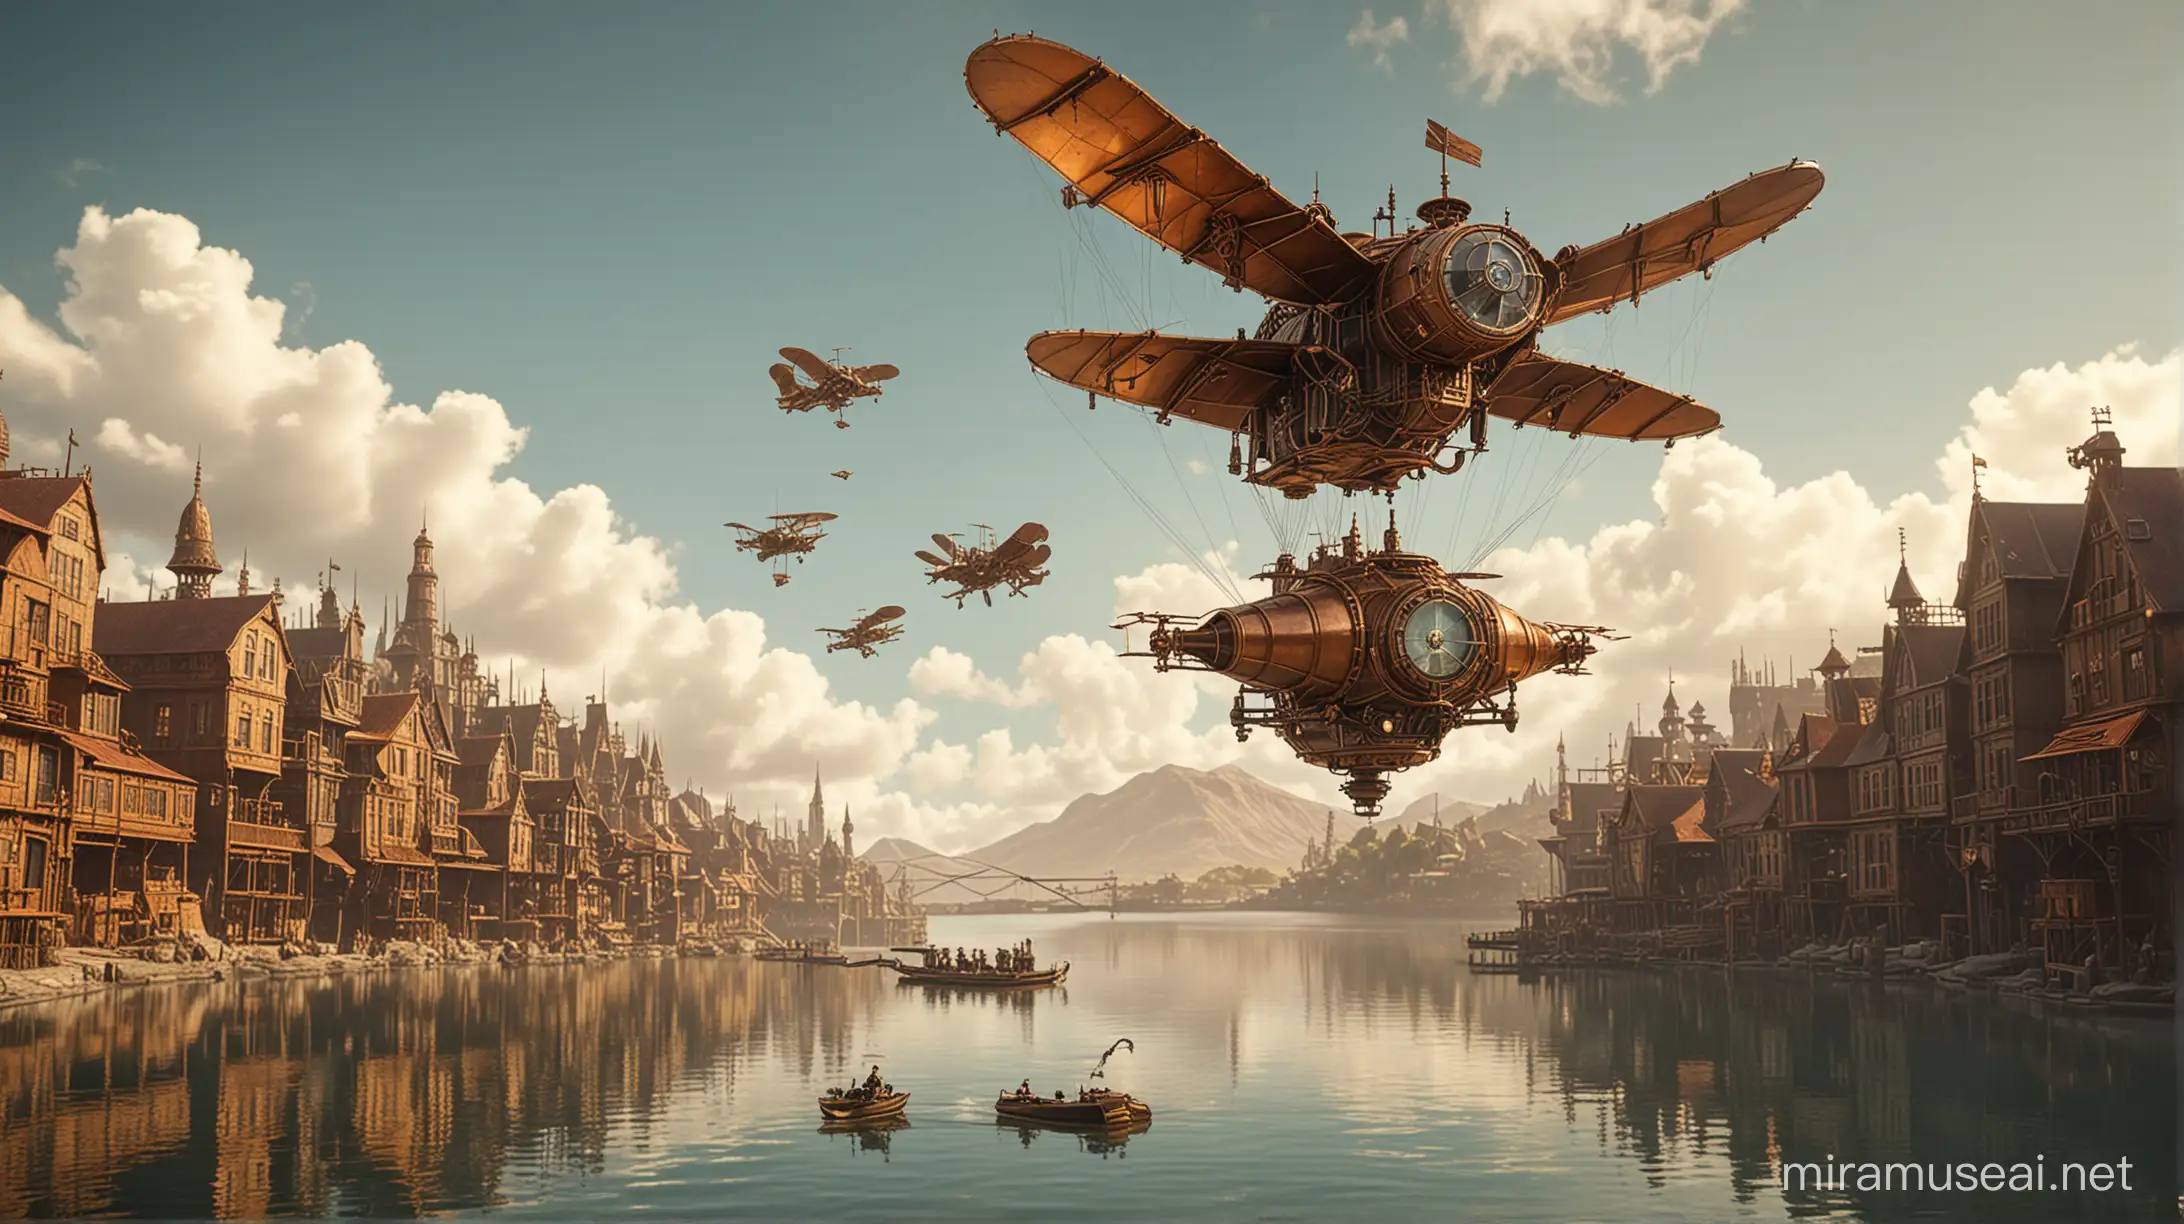 large steampunk ornitopter flies over an artificial steampunk isle on a lake. the isle is made of copper and gold.